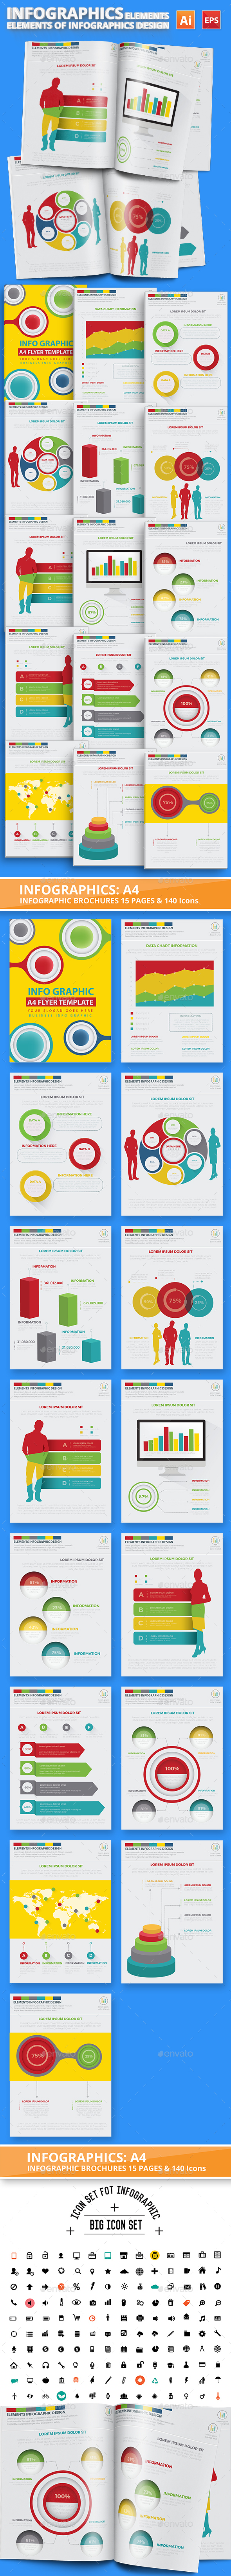 Elements Of Infographic Design